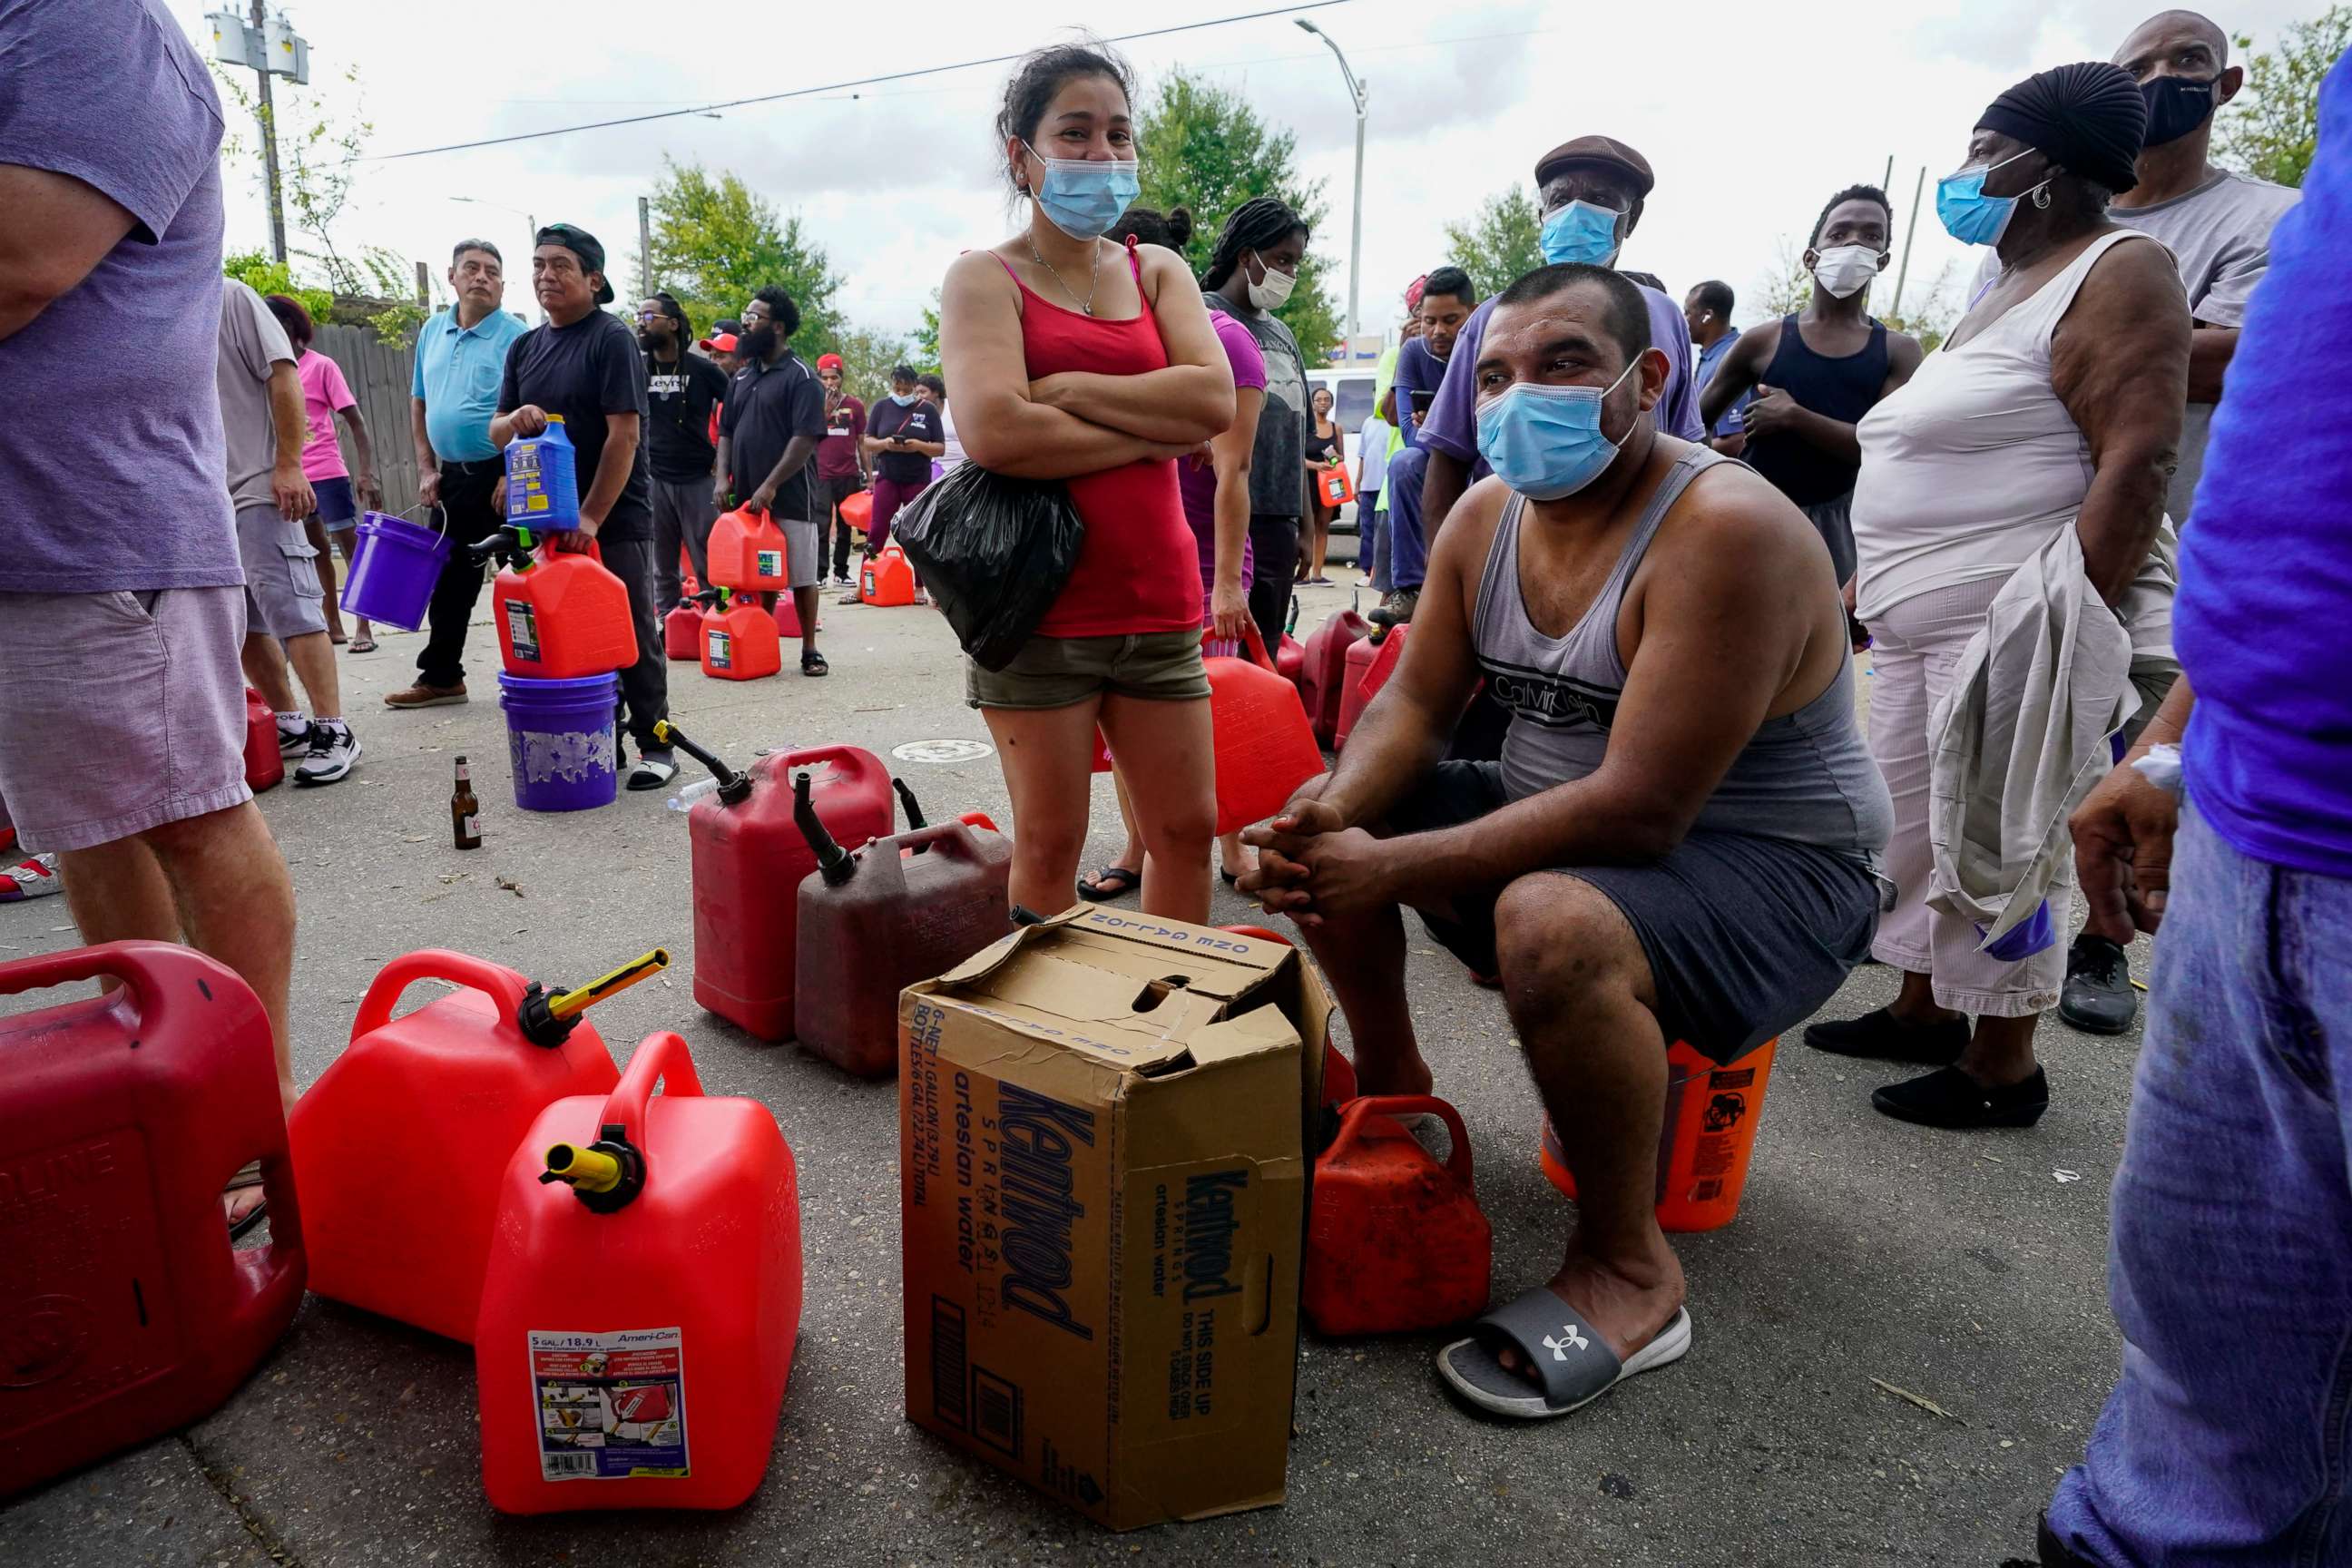 PHOTO: In the aftermath of Hurricane Ida, people wait in line for gas, Aug. 31, 2021, in New Orleans, La.